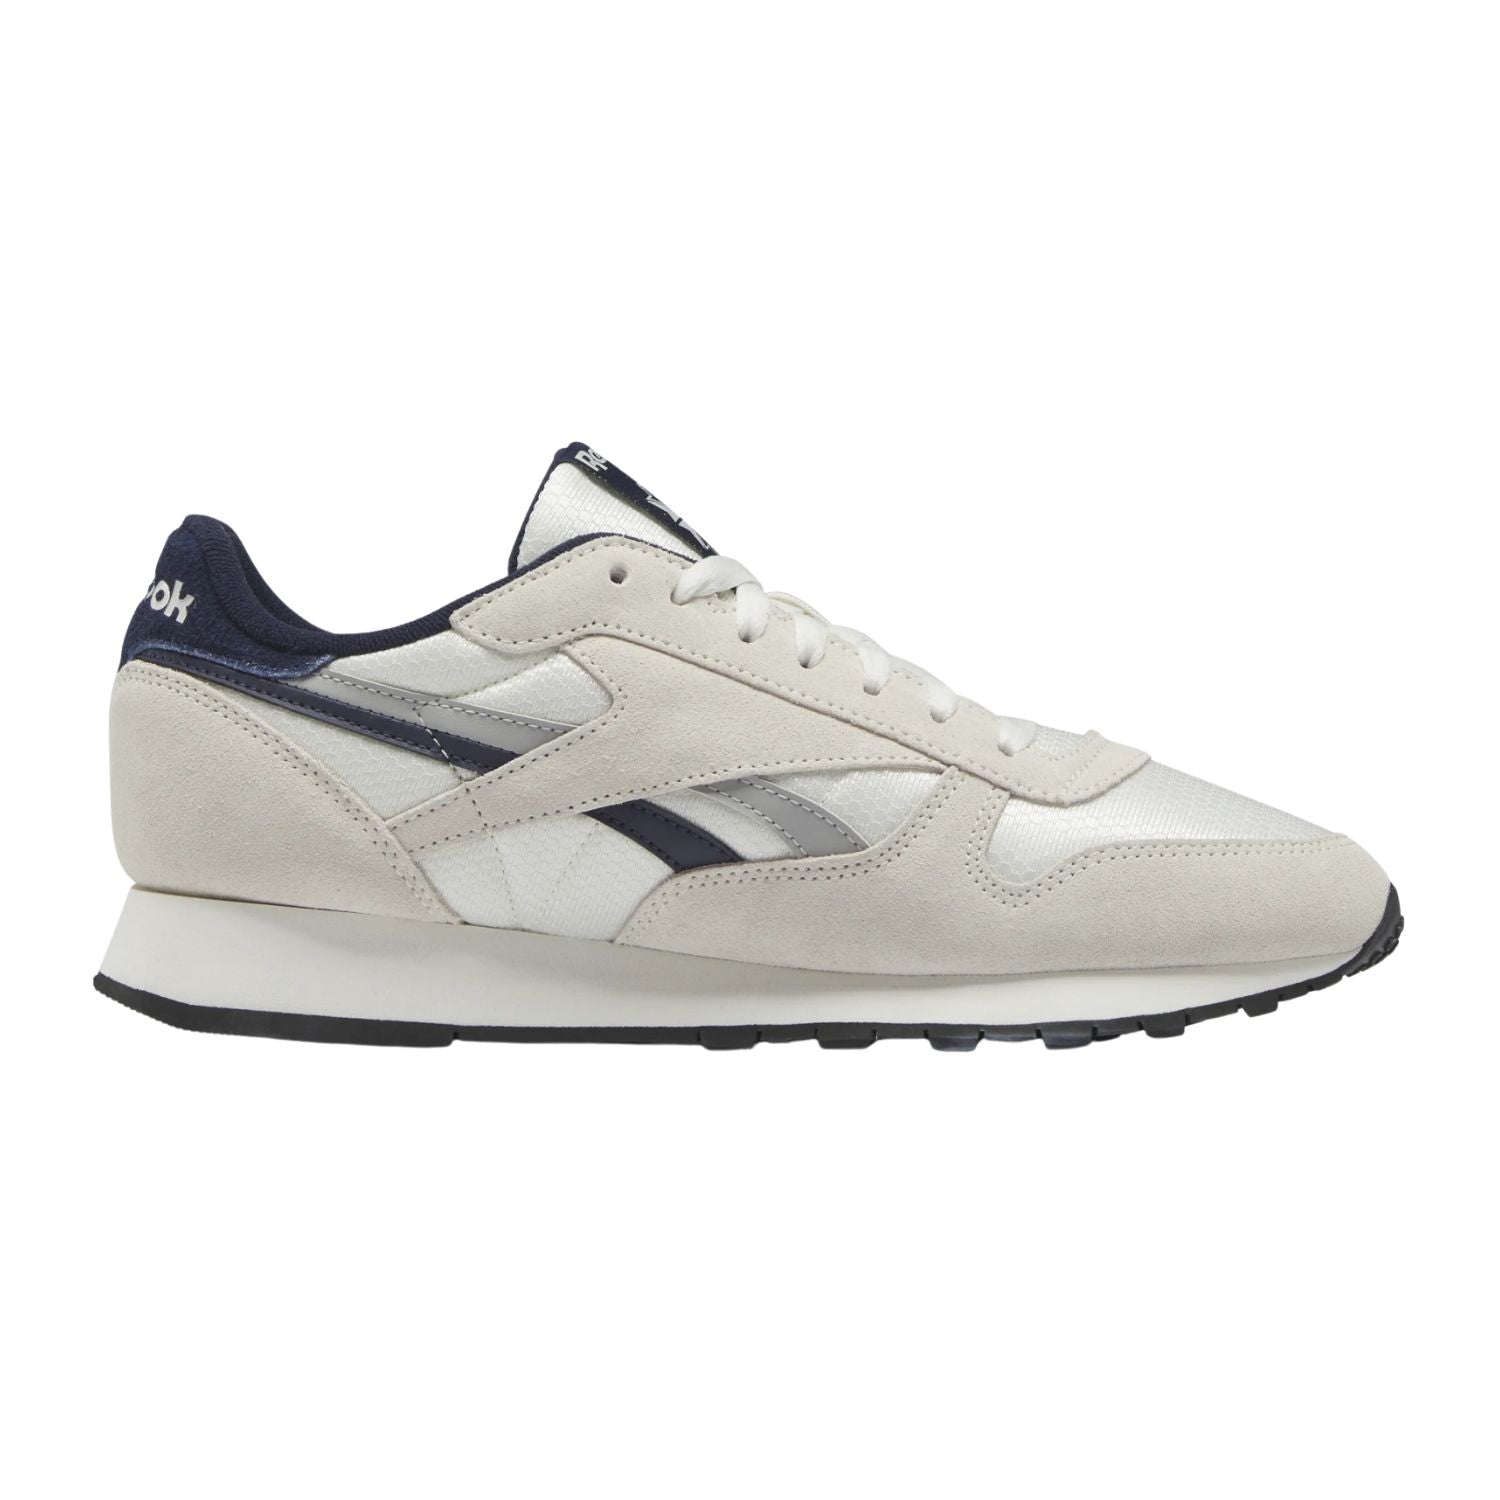 Reebok Classics Leather Mens Style : Gy7302